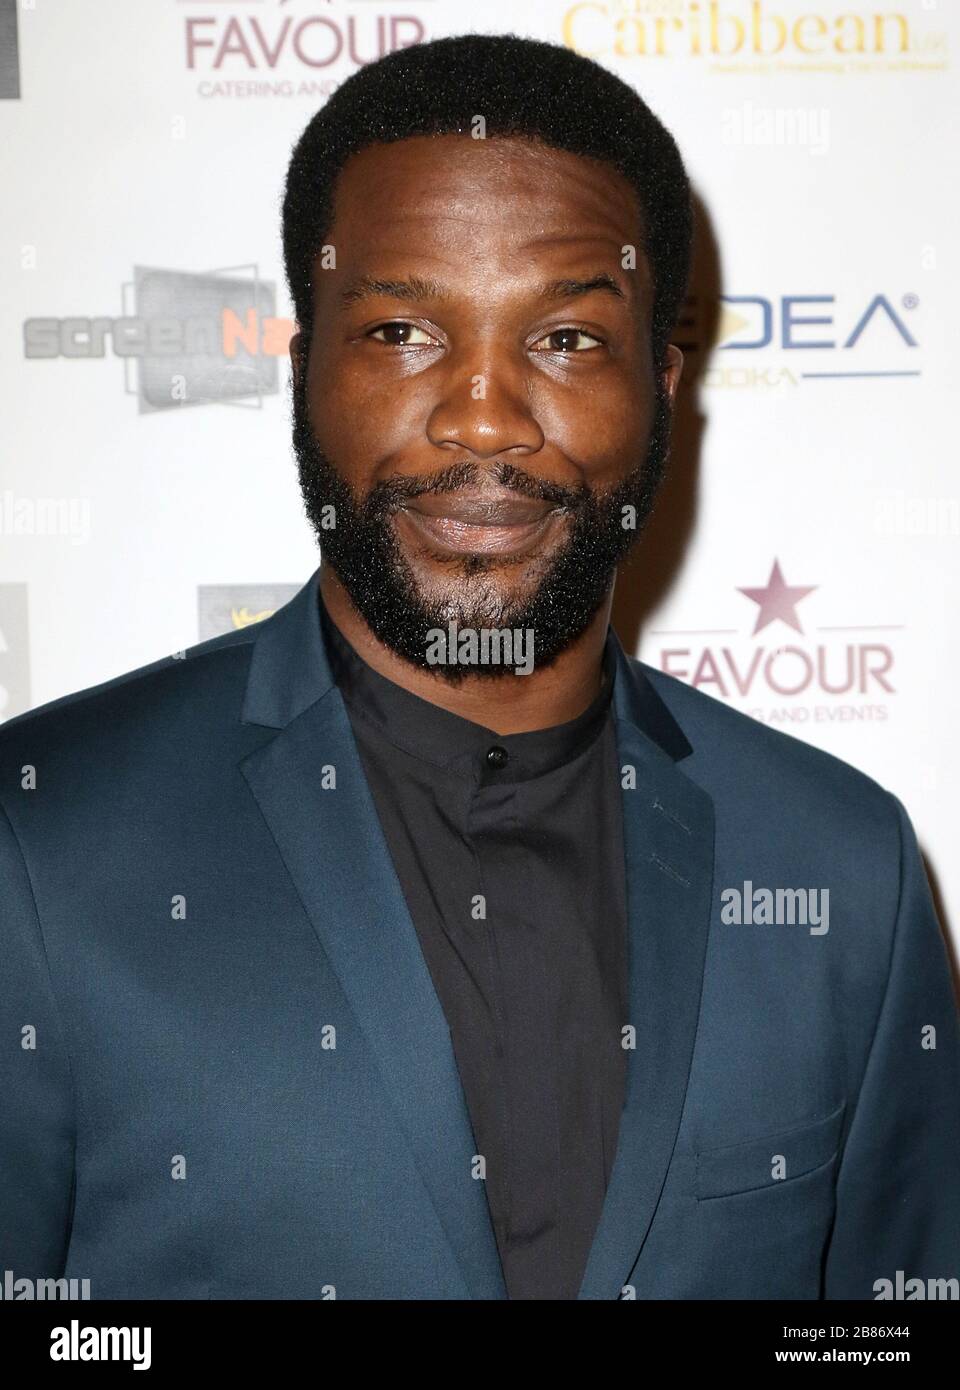 May 07, 2017 - London, England, UK - Screen Nation Film & Television Awards 2017, Park Plaza Riverbank - Red Carpet Arrivals Photo Shows: Guest Stock Photo